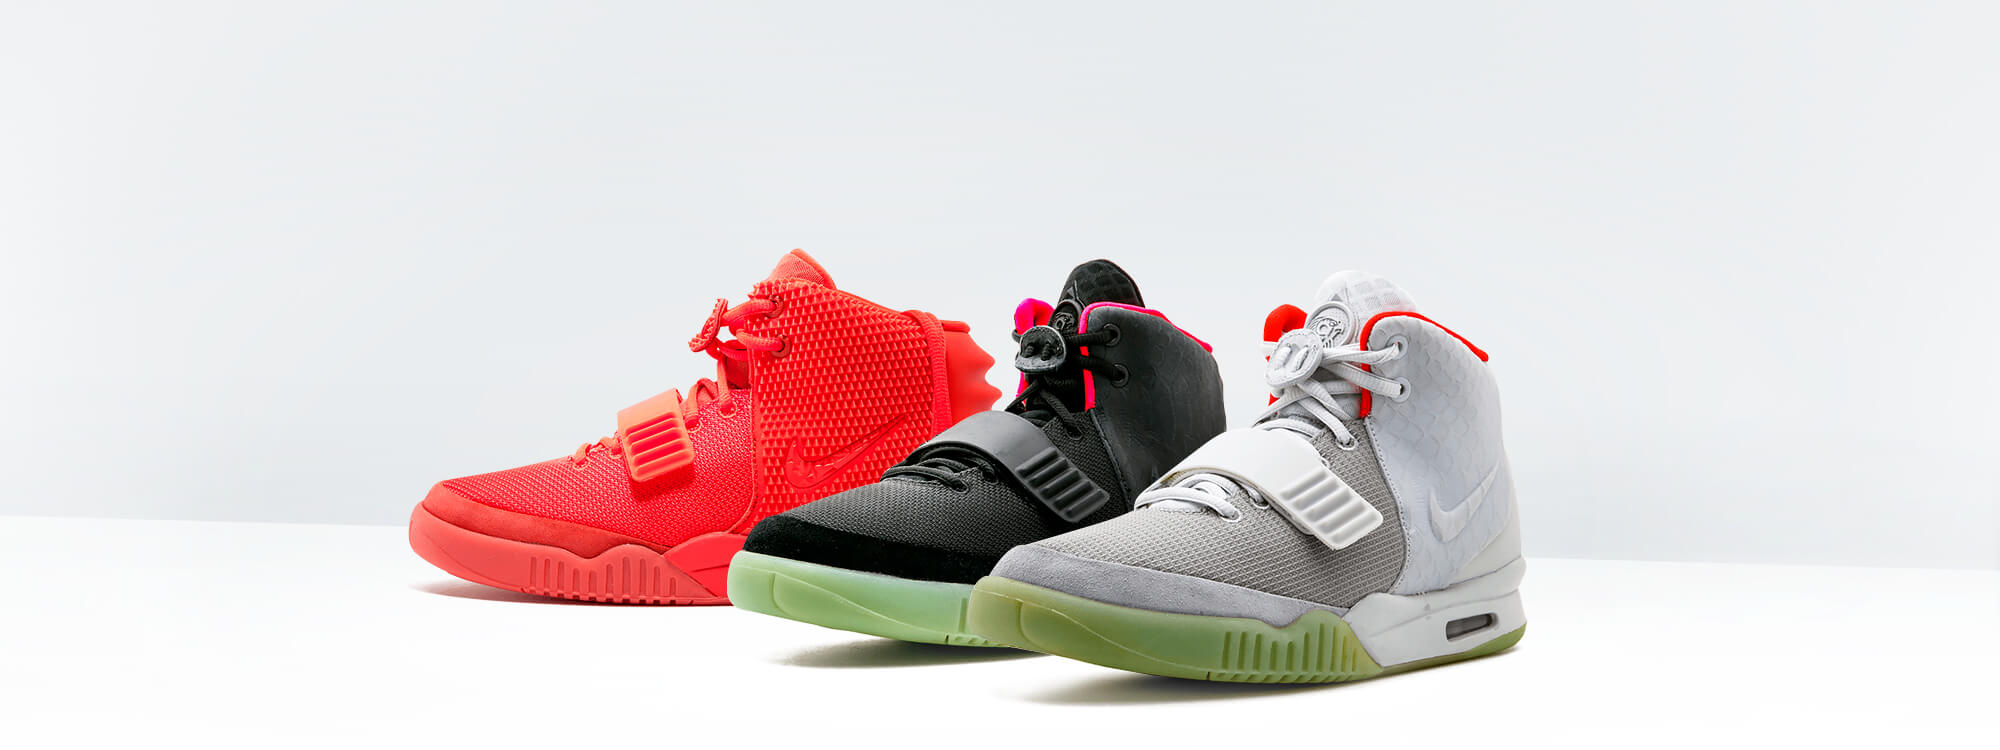 buy the best quality Nike Air Yeezy   